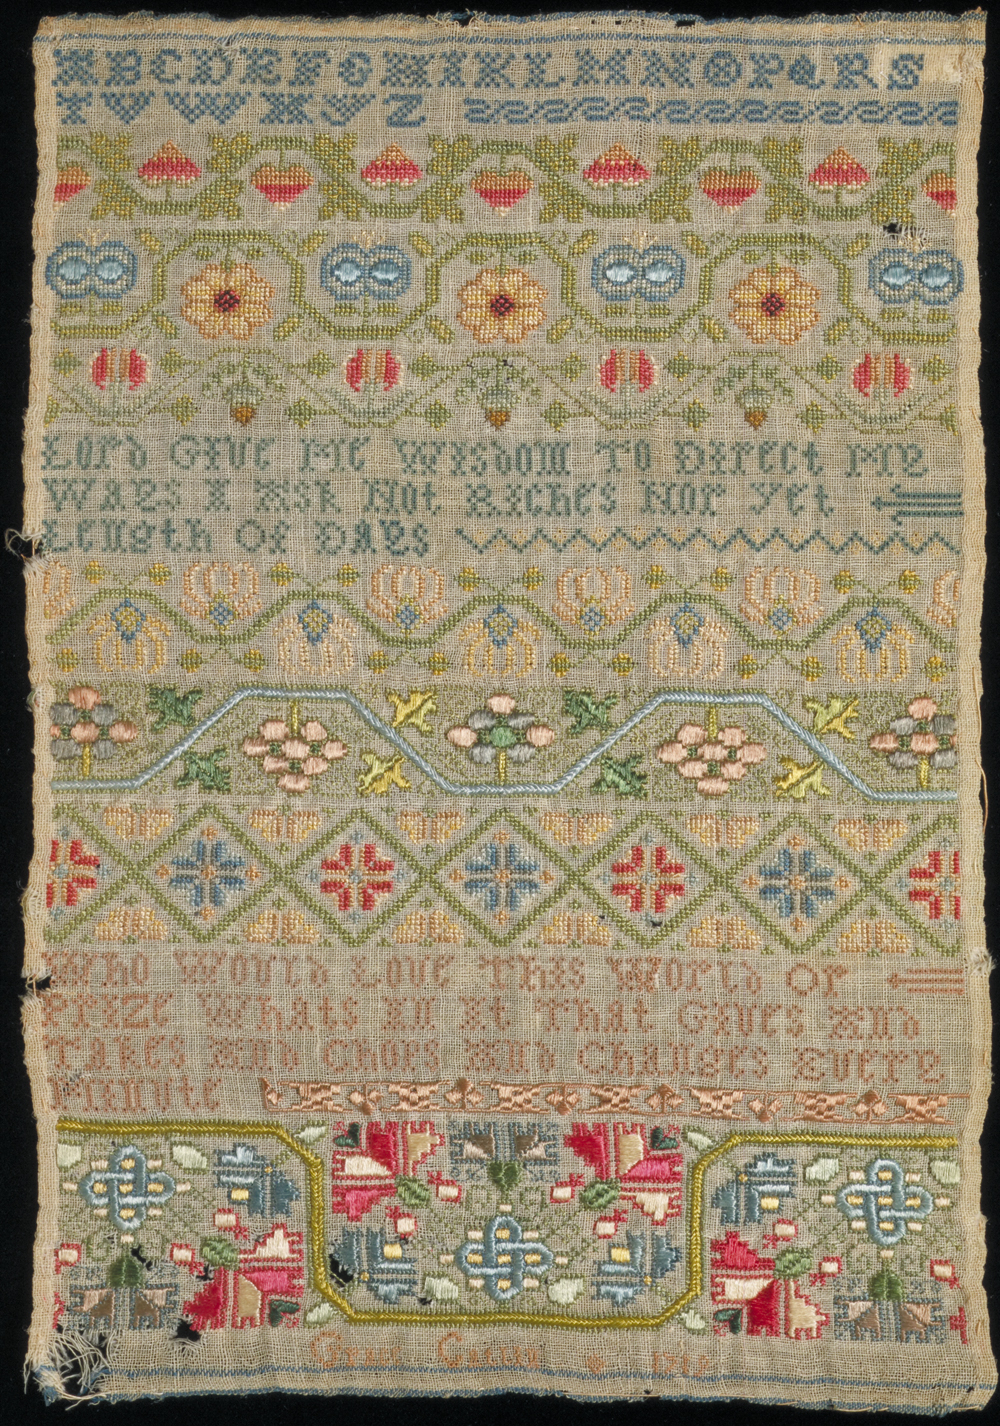 Embroidery Sampler Patterns A History Of Samplers Victoria And Albert Museum